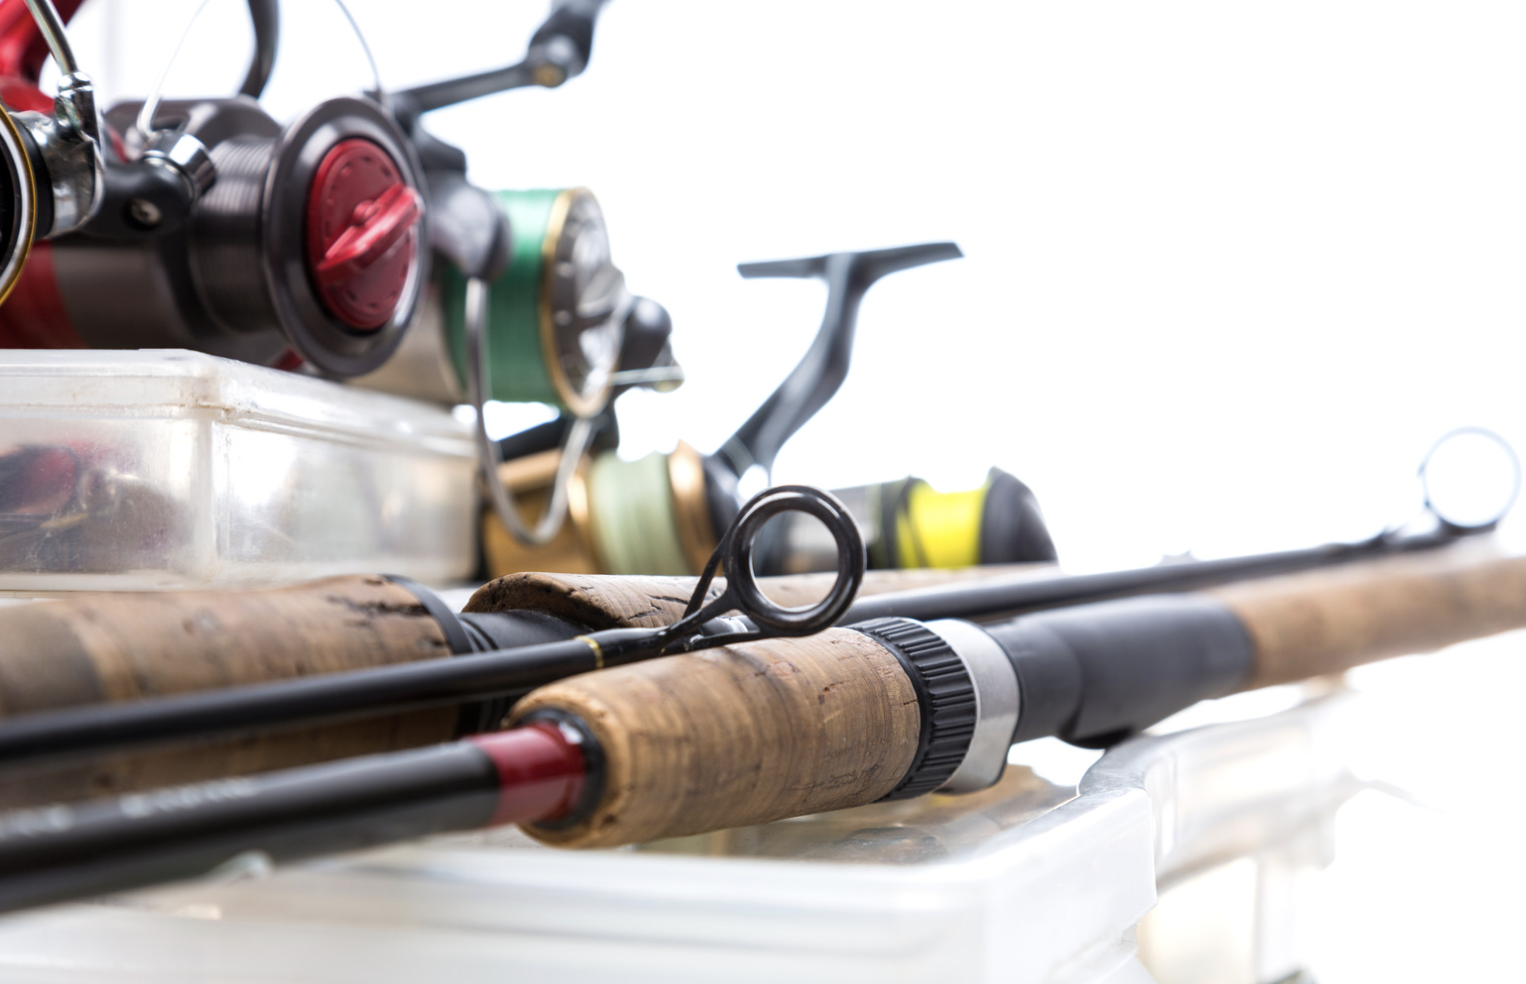 No Rod Lockers: Where do you store your extra rods while fishing